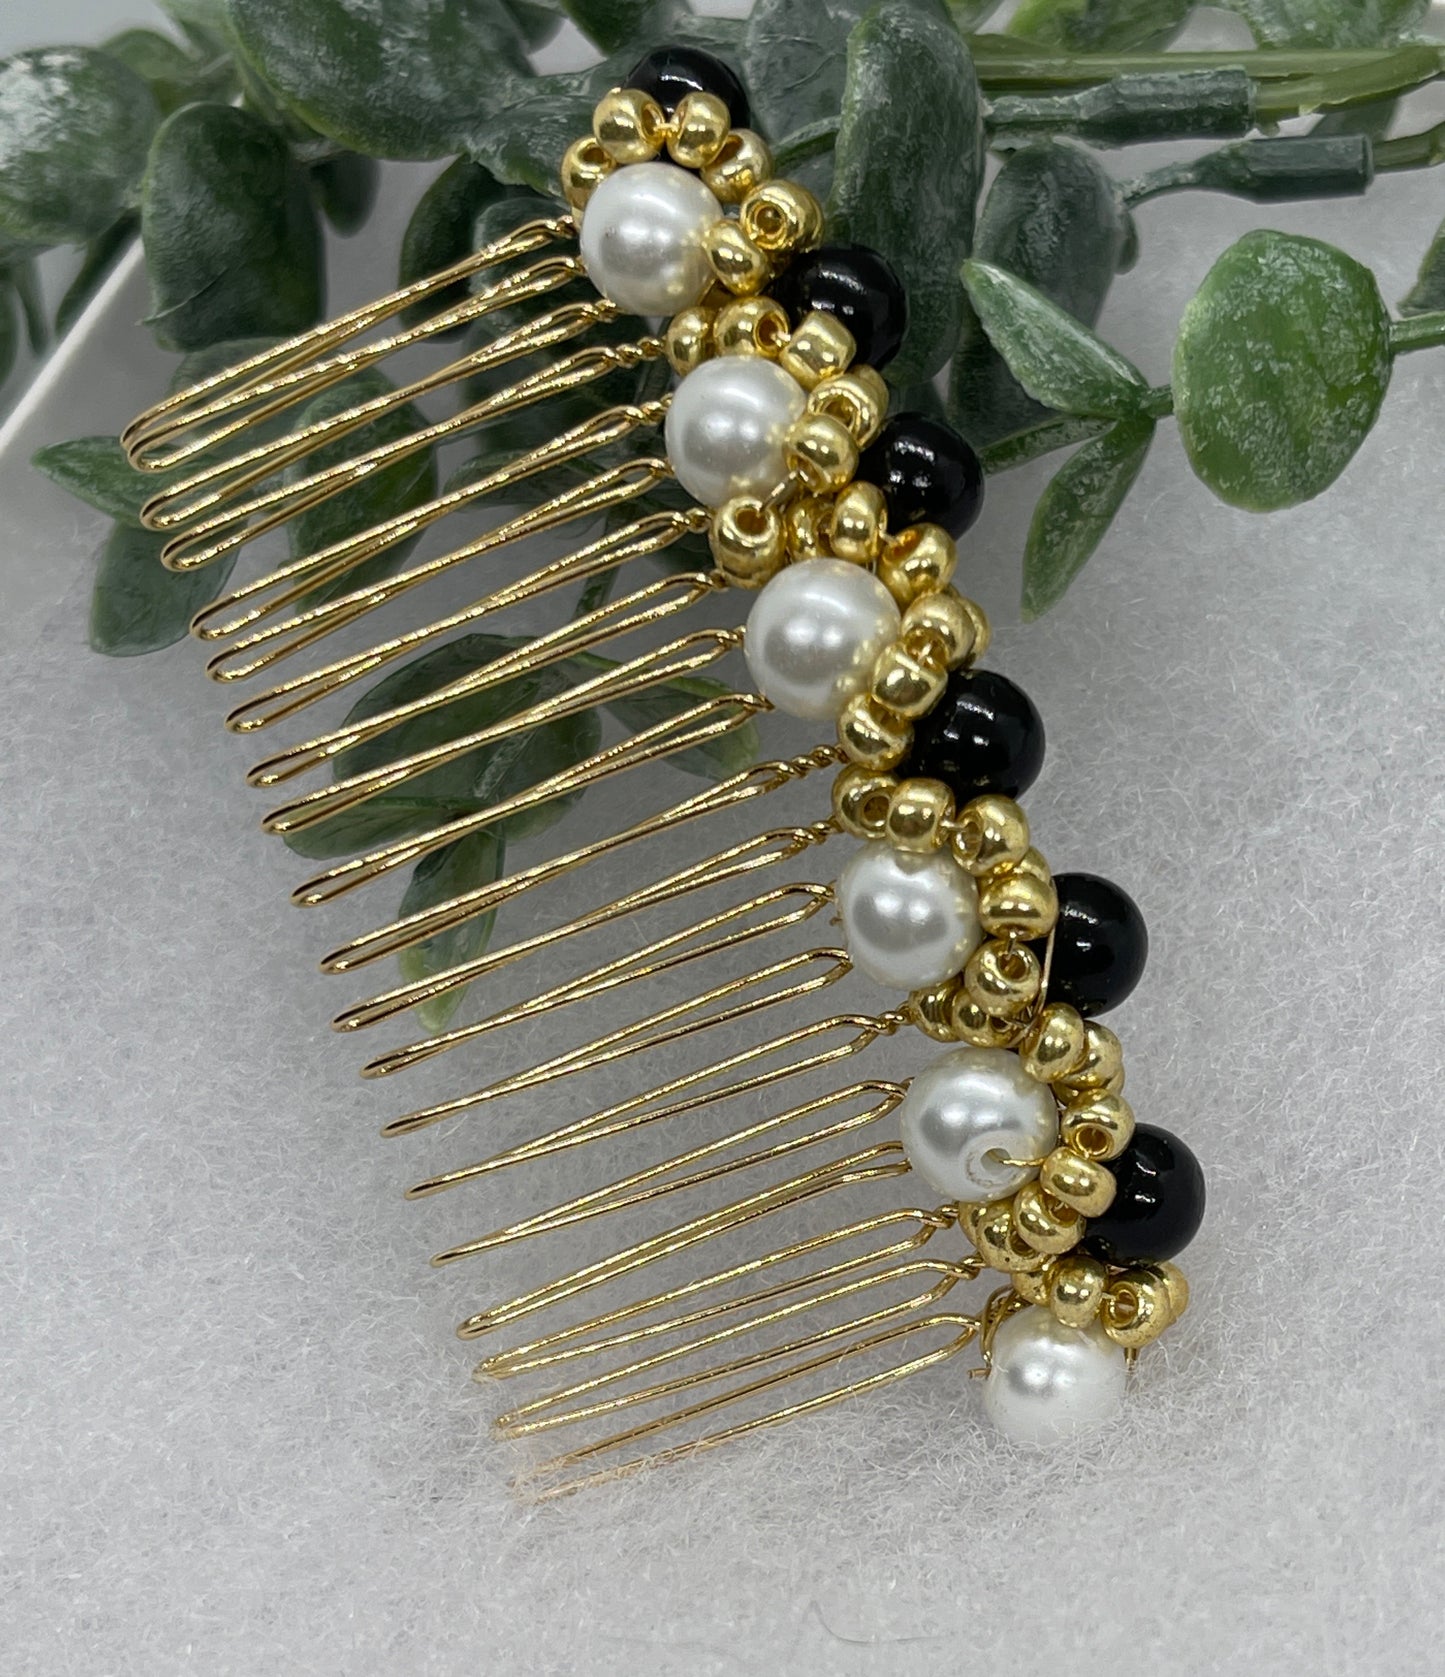 Black White  gold beaded side Comb 3.5” gold Metal hair Accessories bridesmaid birthday princess wedding gift handmade accessories